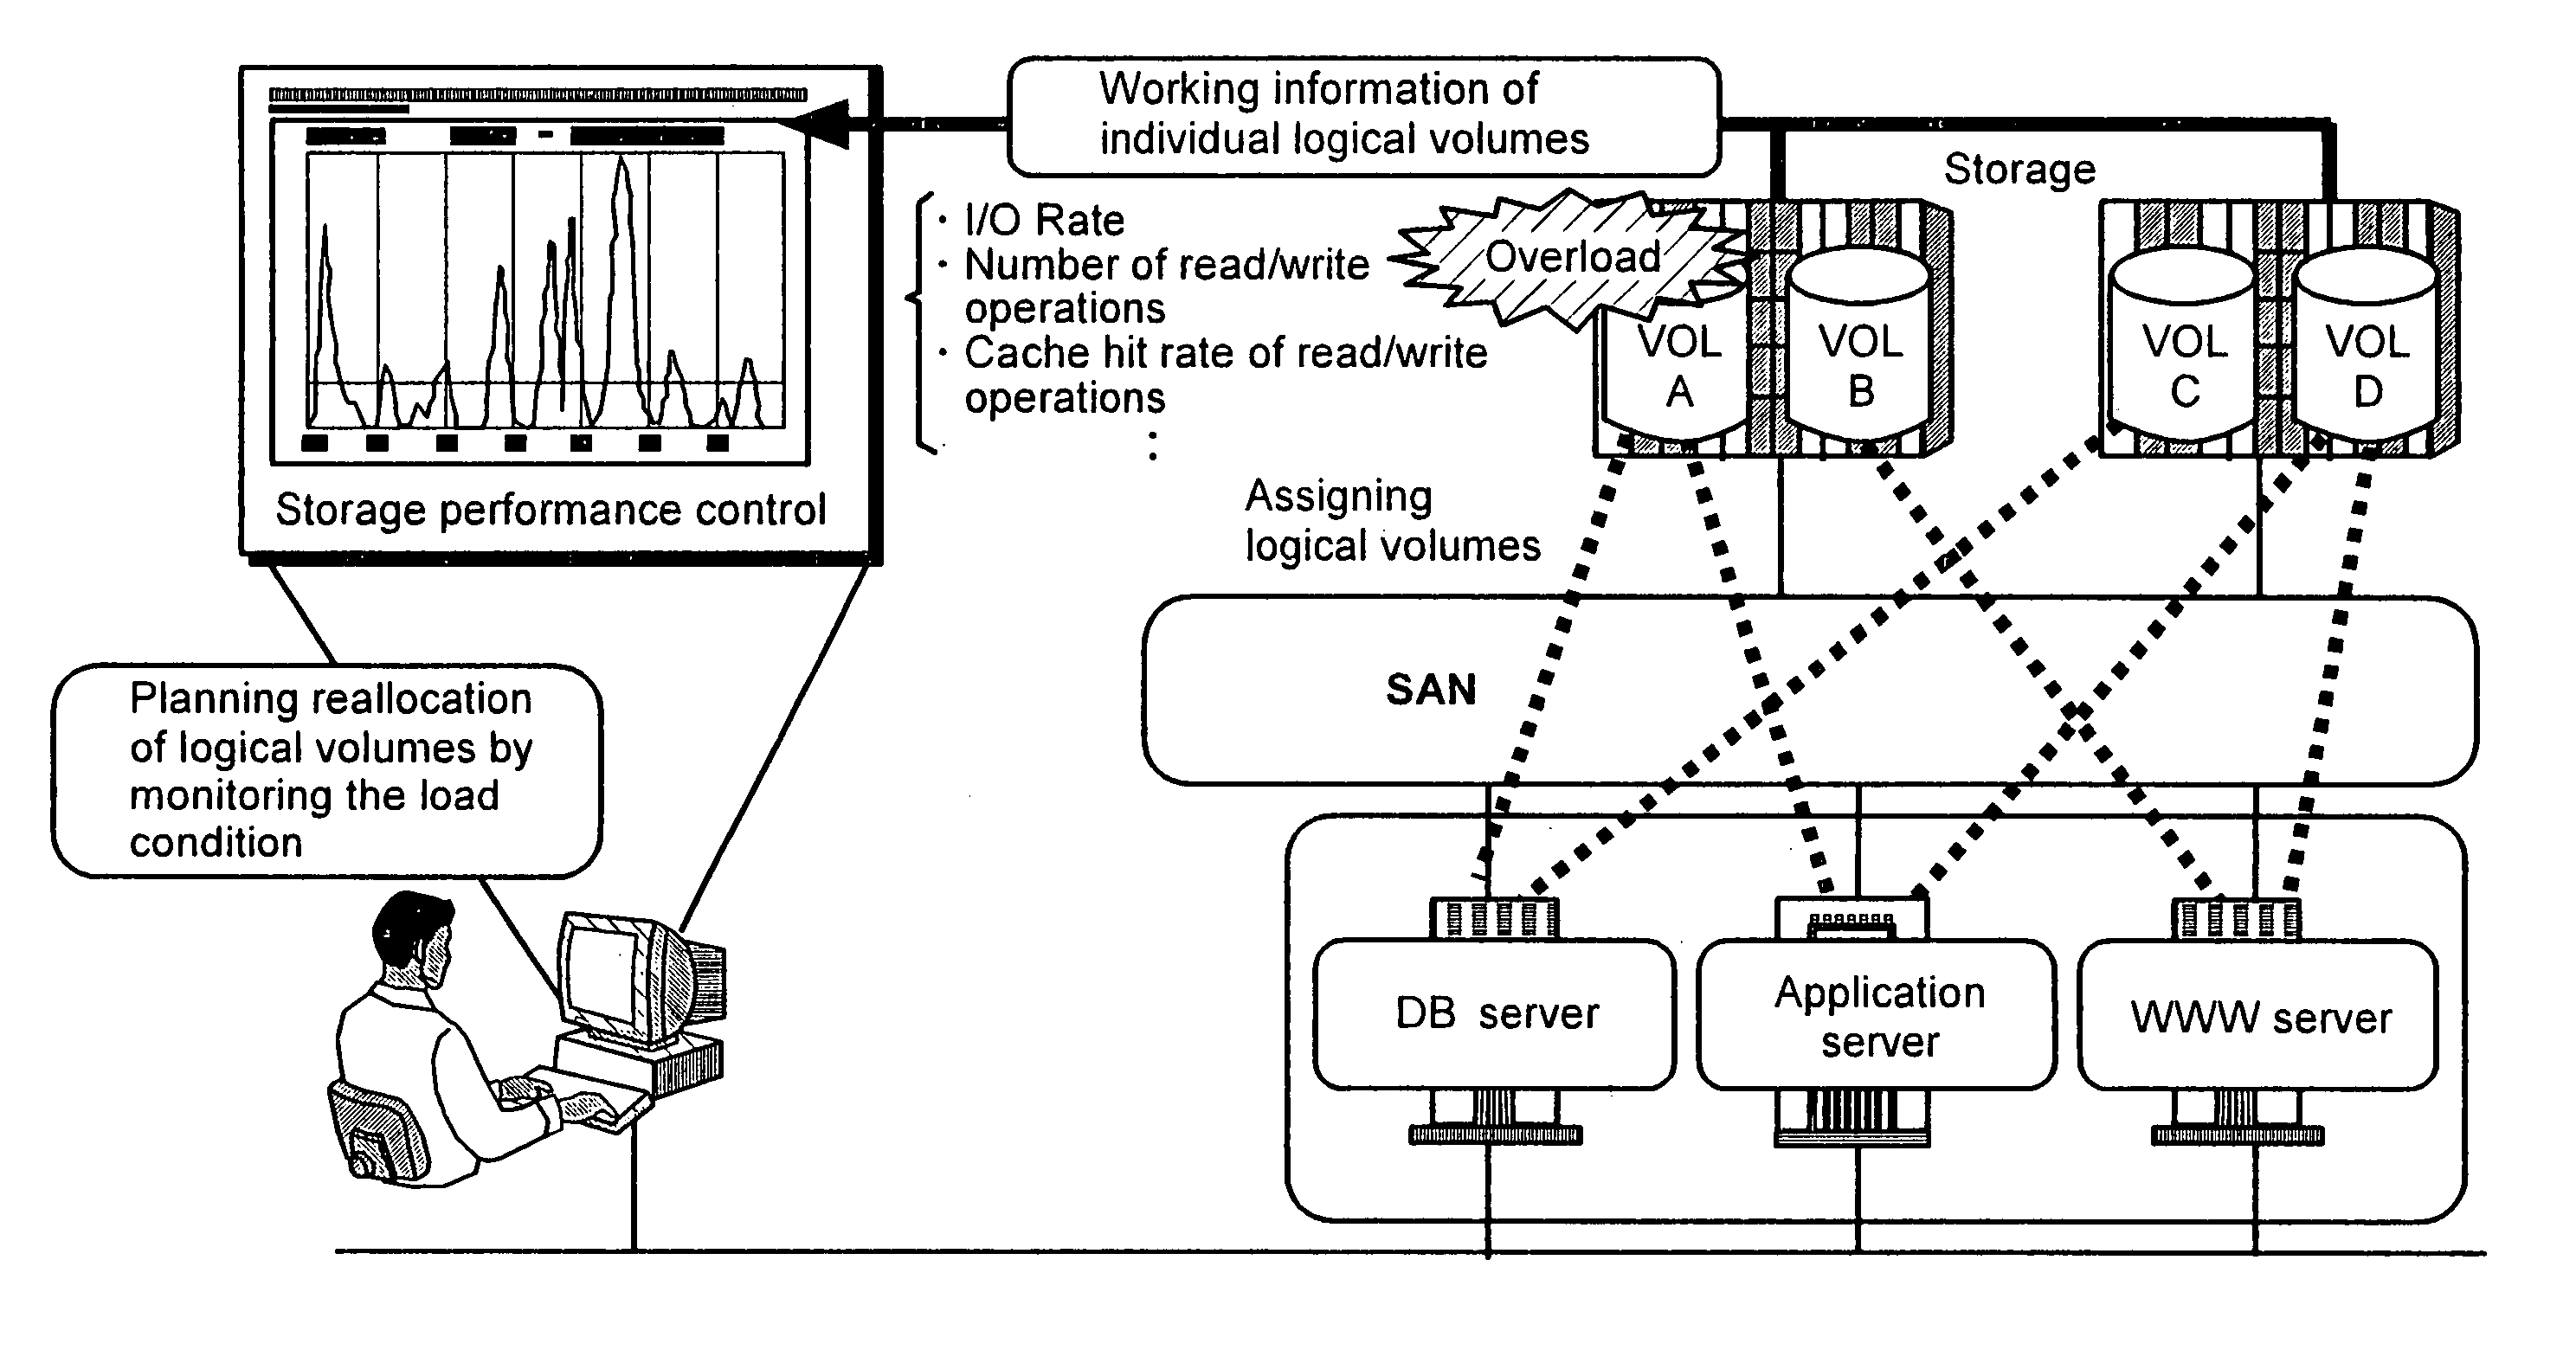 Computer system having a storage area network and method of handling data in the computer system